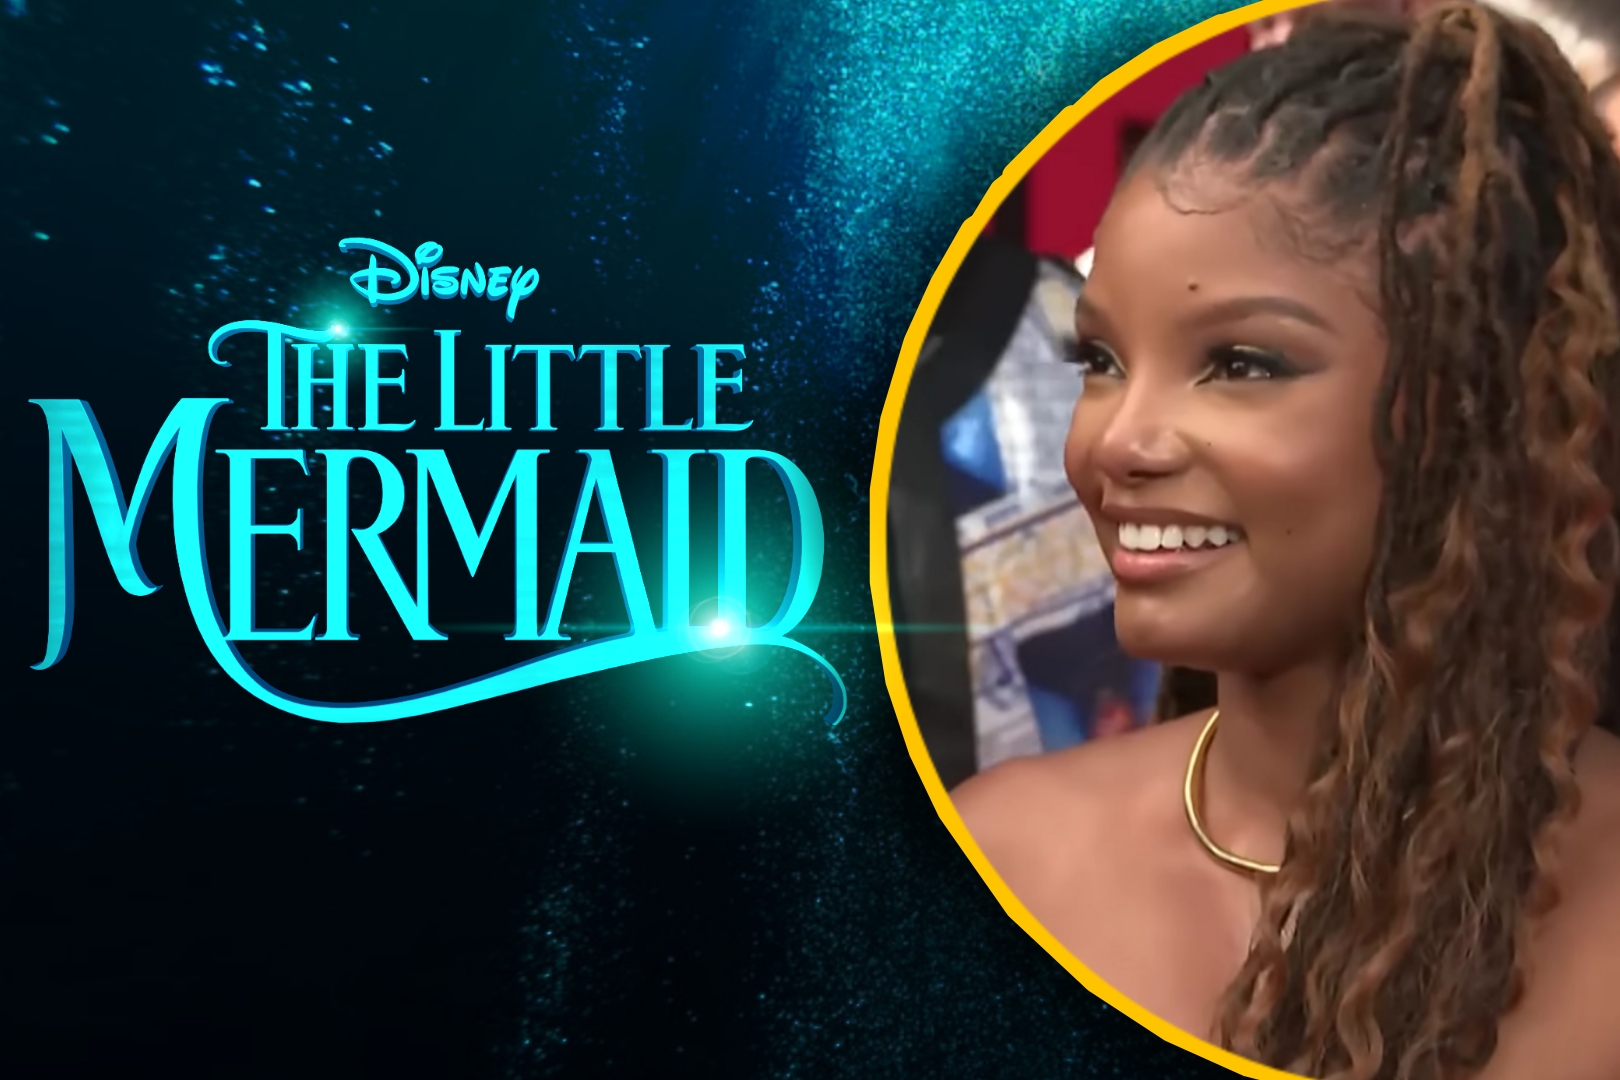 Halle Bailey “Got Emotional” While Recording ADR For ‘The Little Mermaid’